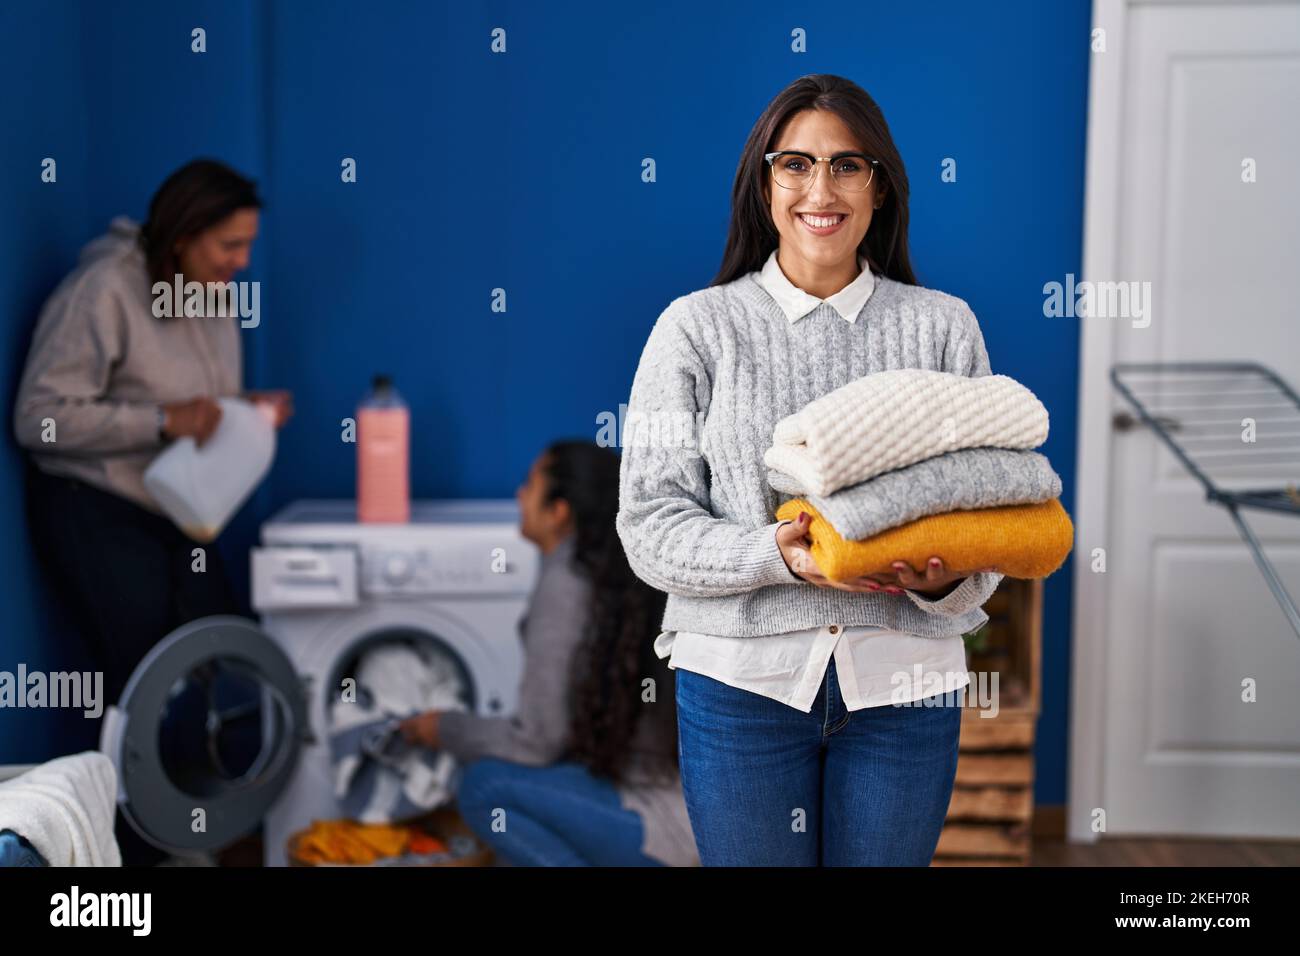 Three women doing laundry at home smiling with a happy and cool smile on face. showing teeth. Stock Photo